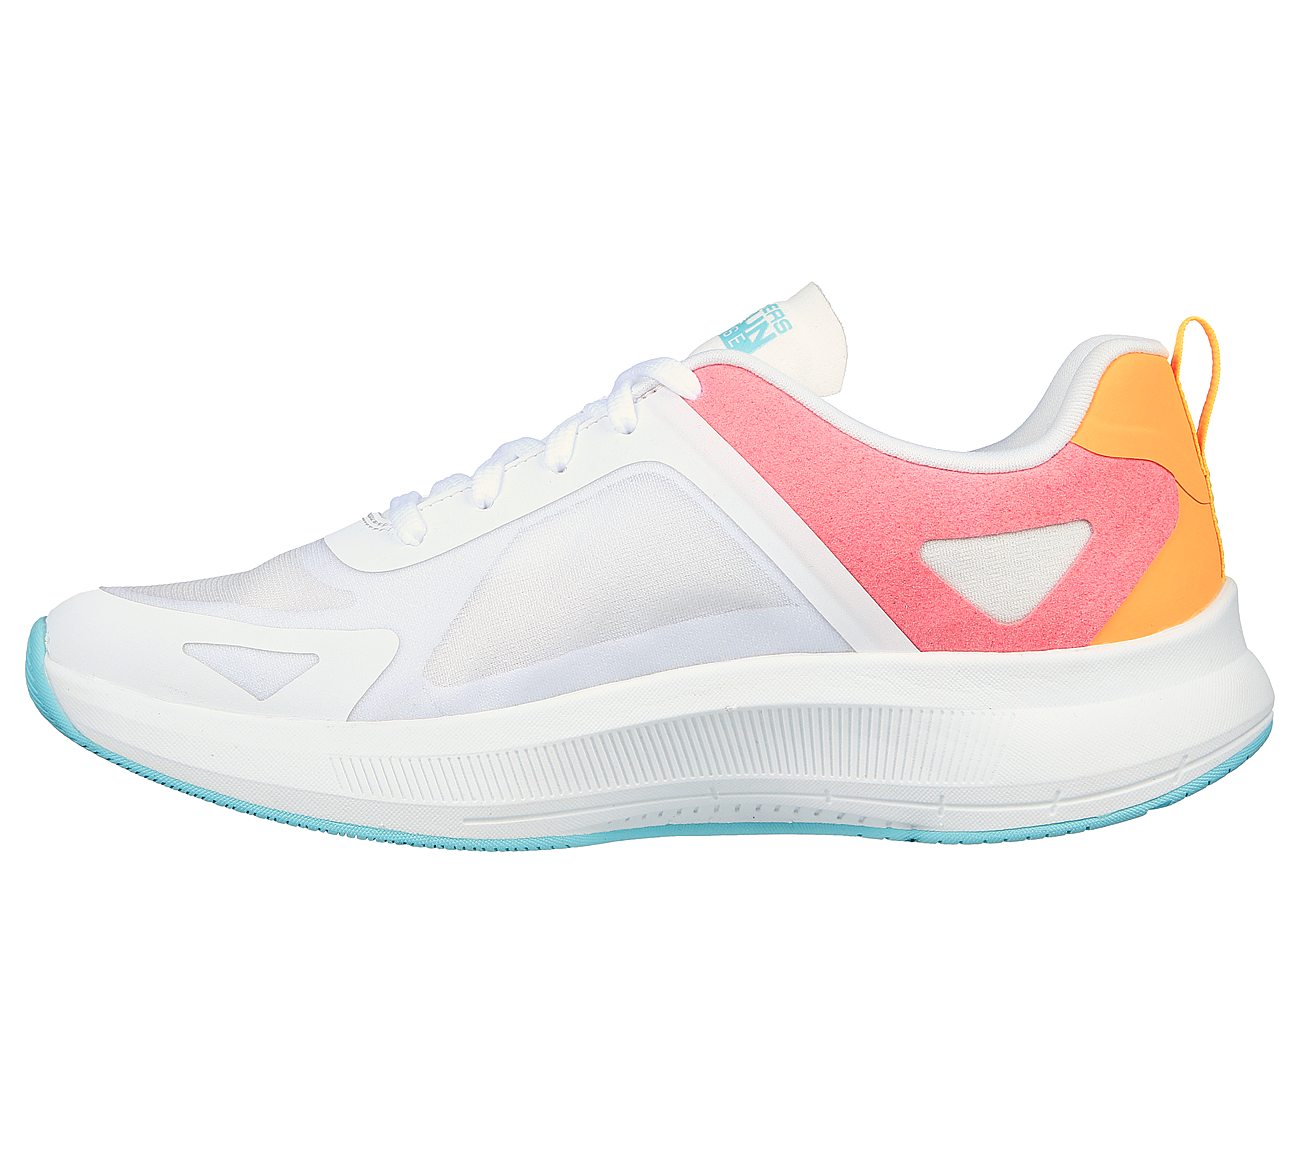 GO RUN PULSE - OPERATE, WHITE/HOT PINK Footwear Left View